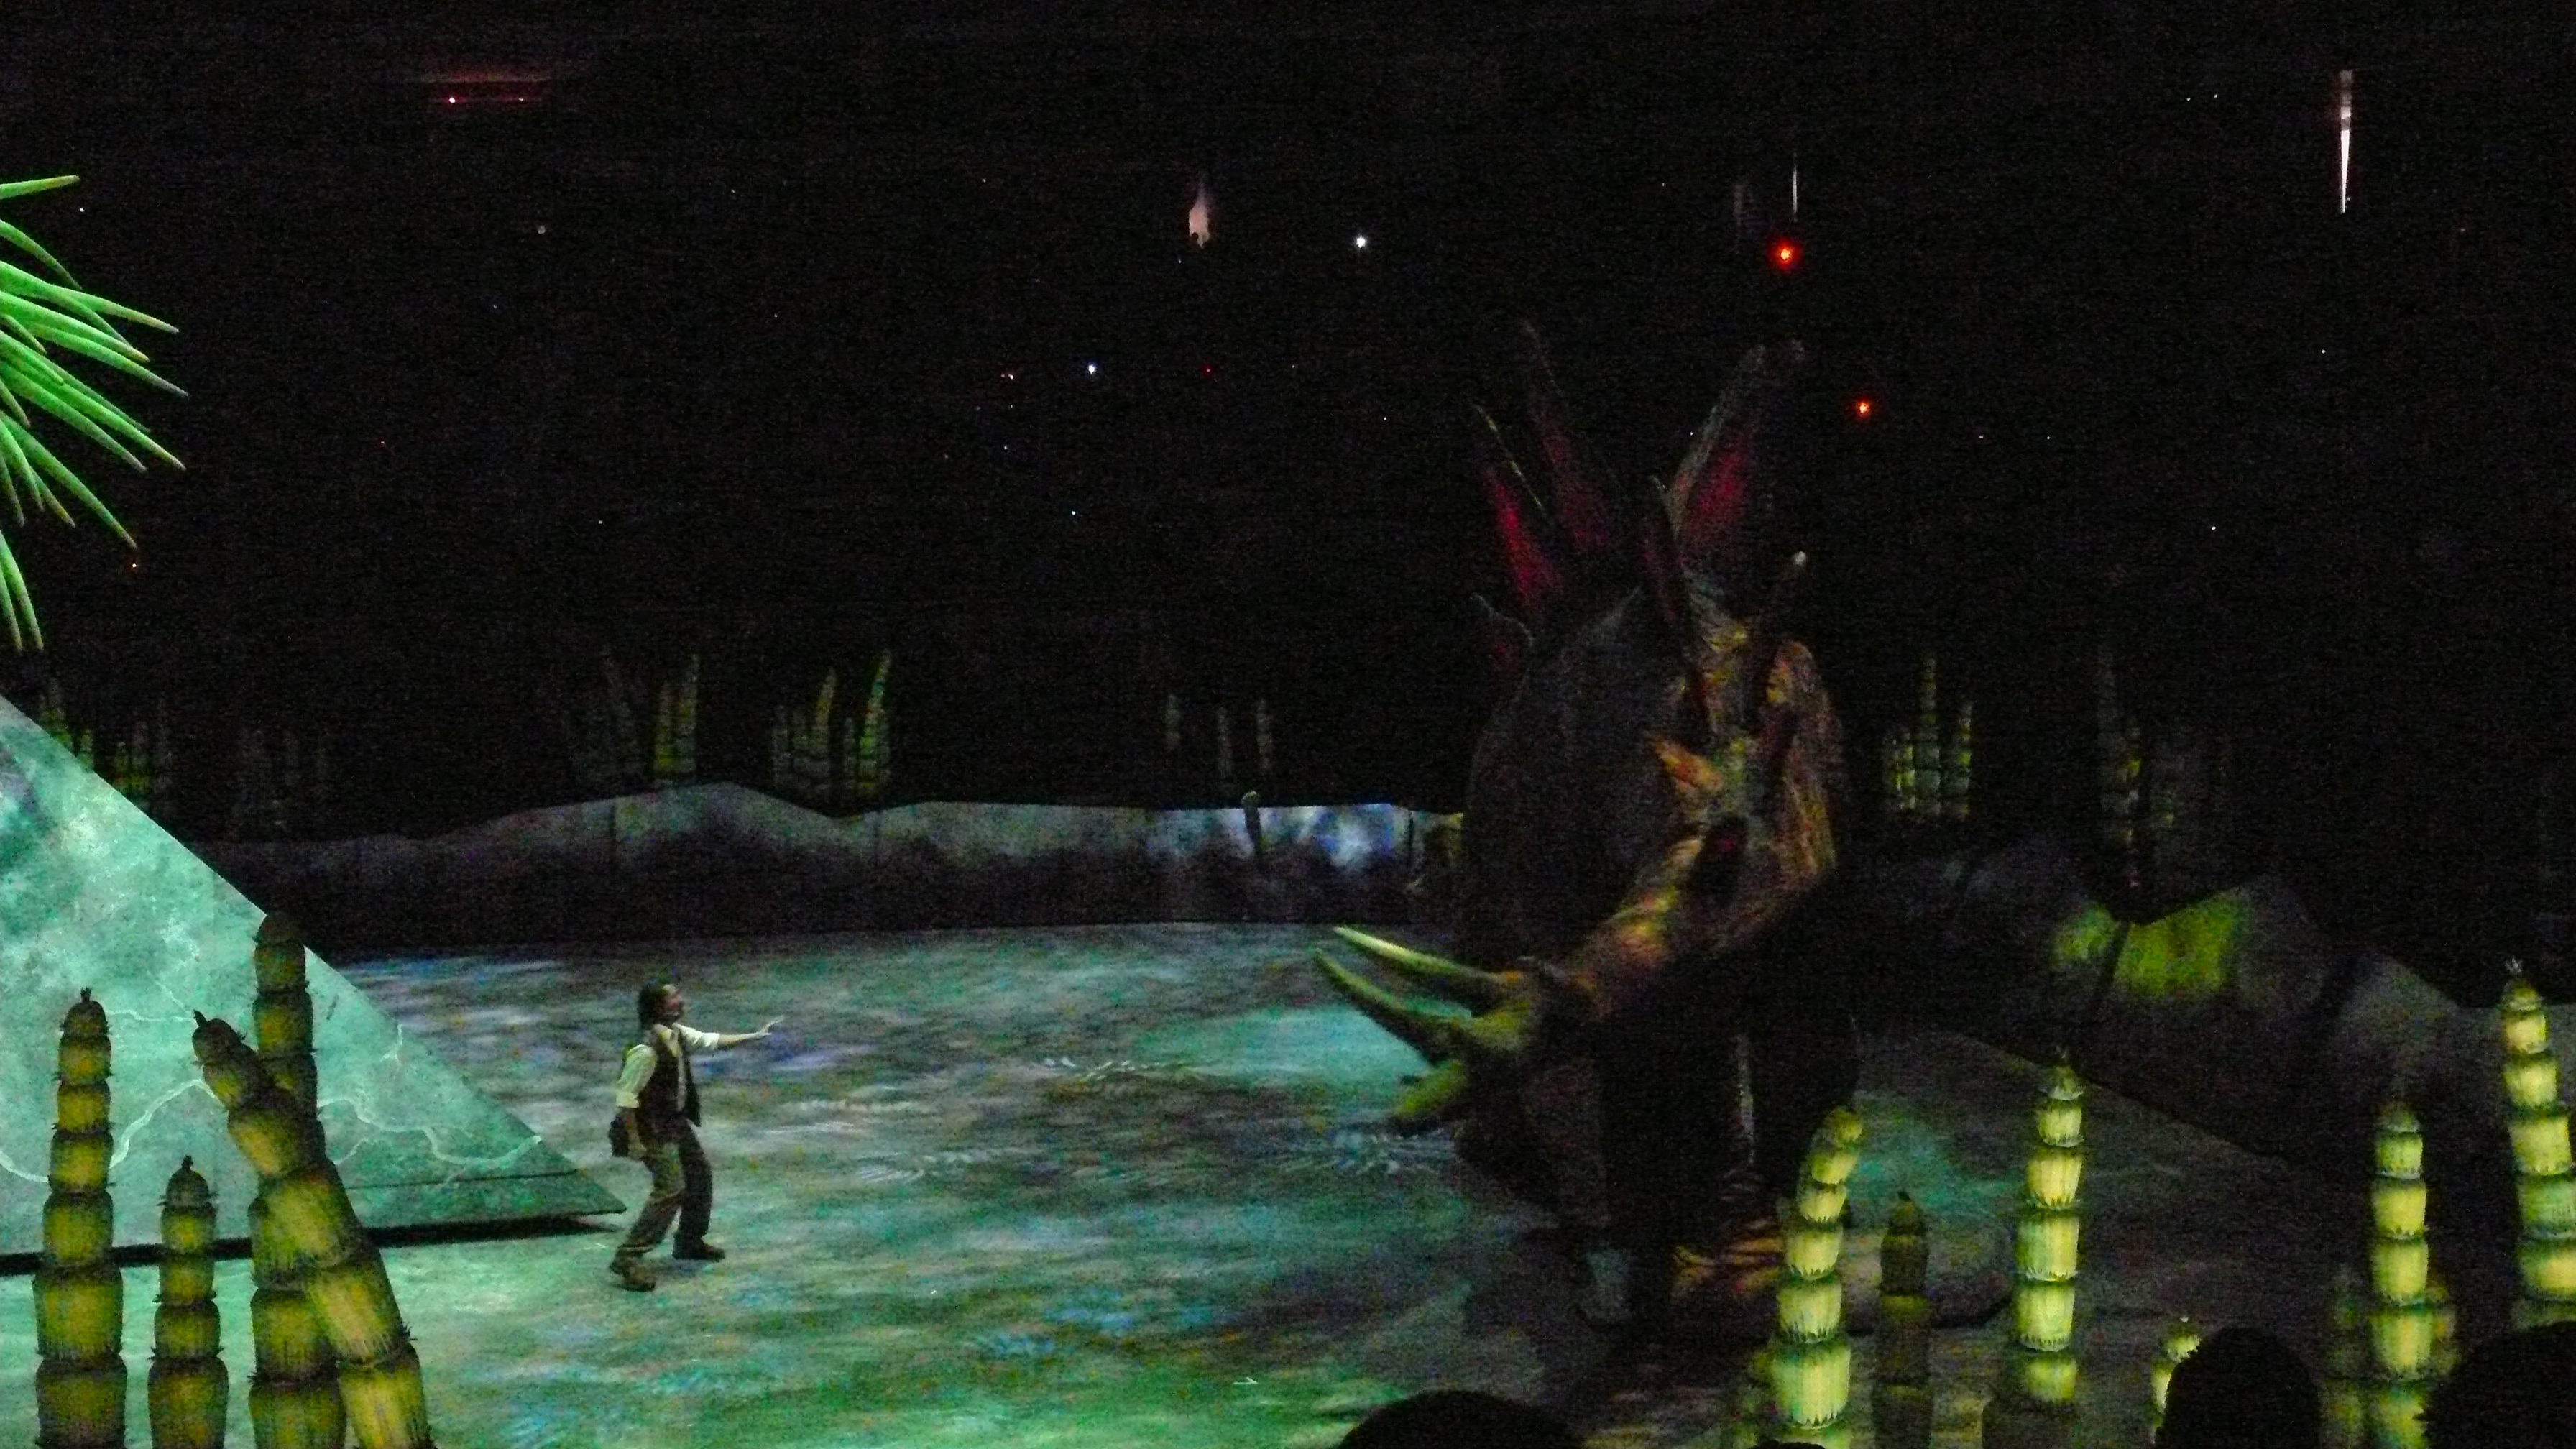 Performing live in WALKING WITH DINOSAURS in Mexico City in front of 11,000 spectators.